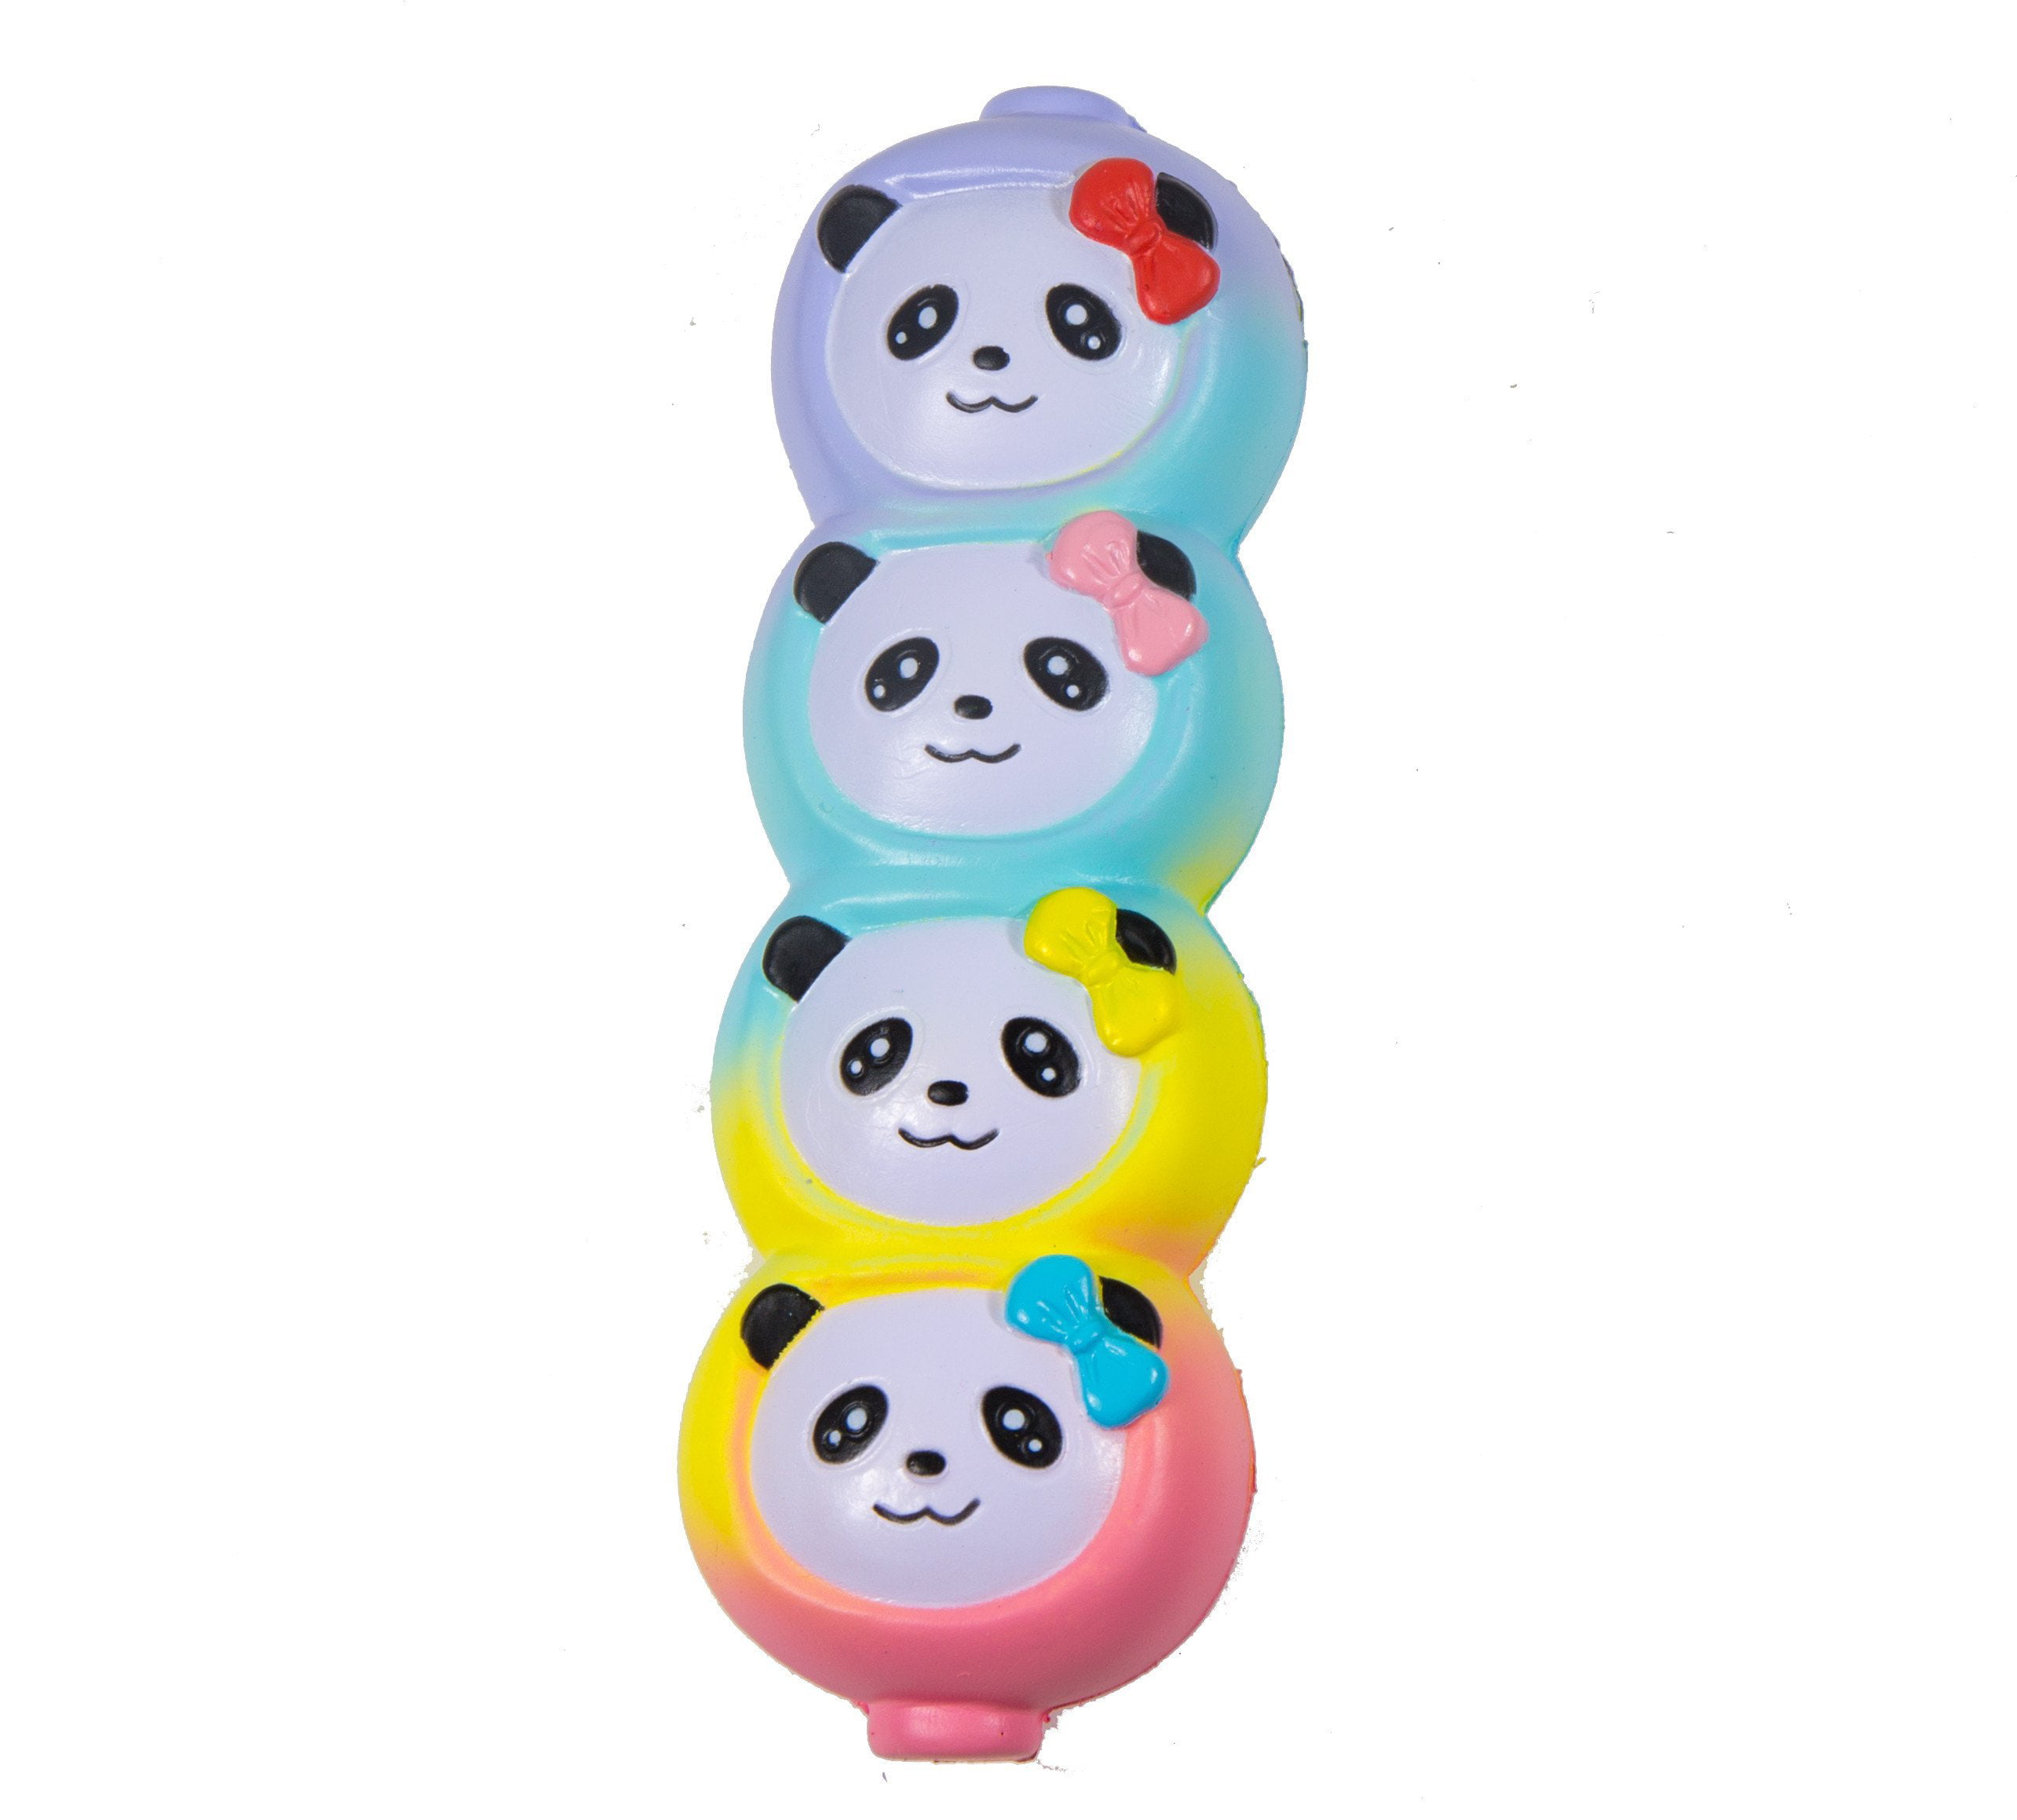 Anboor Squishies Rainbow Bridge Slow Rising Kawaii Scented Soft Squishies Toys 